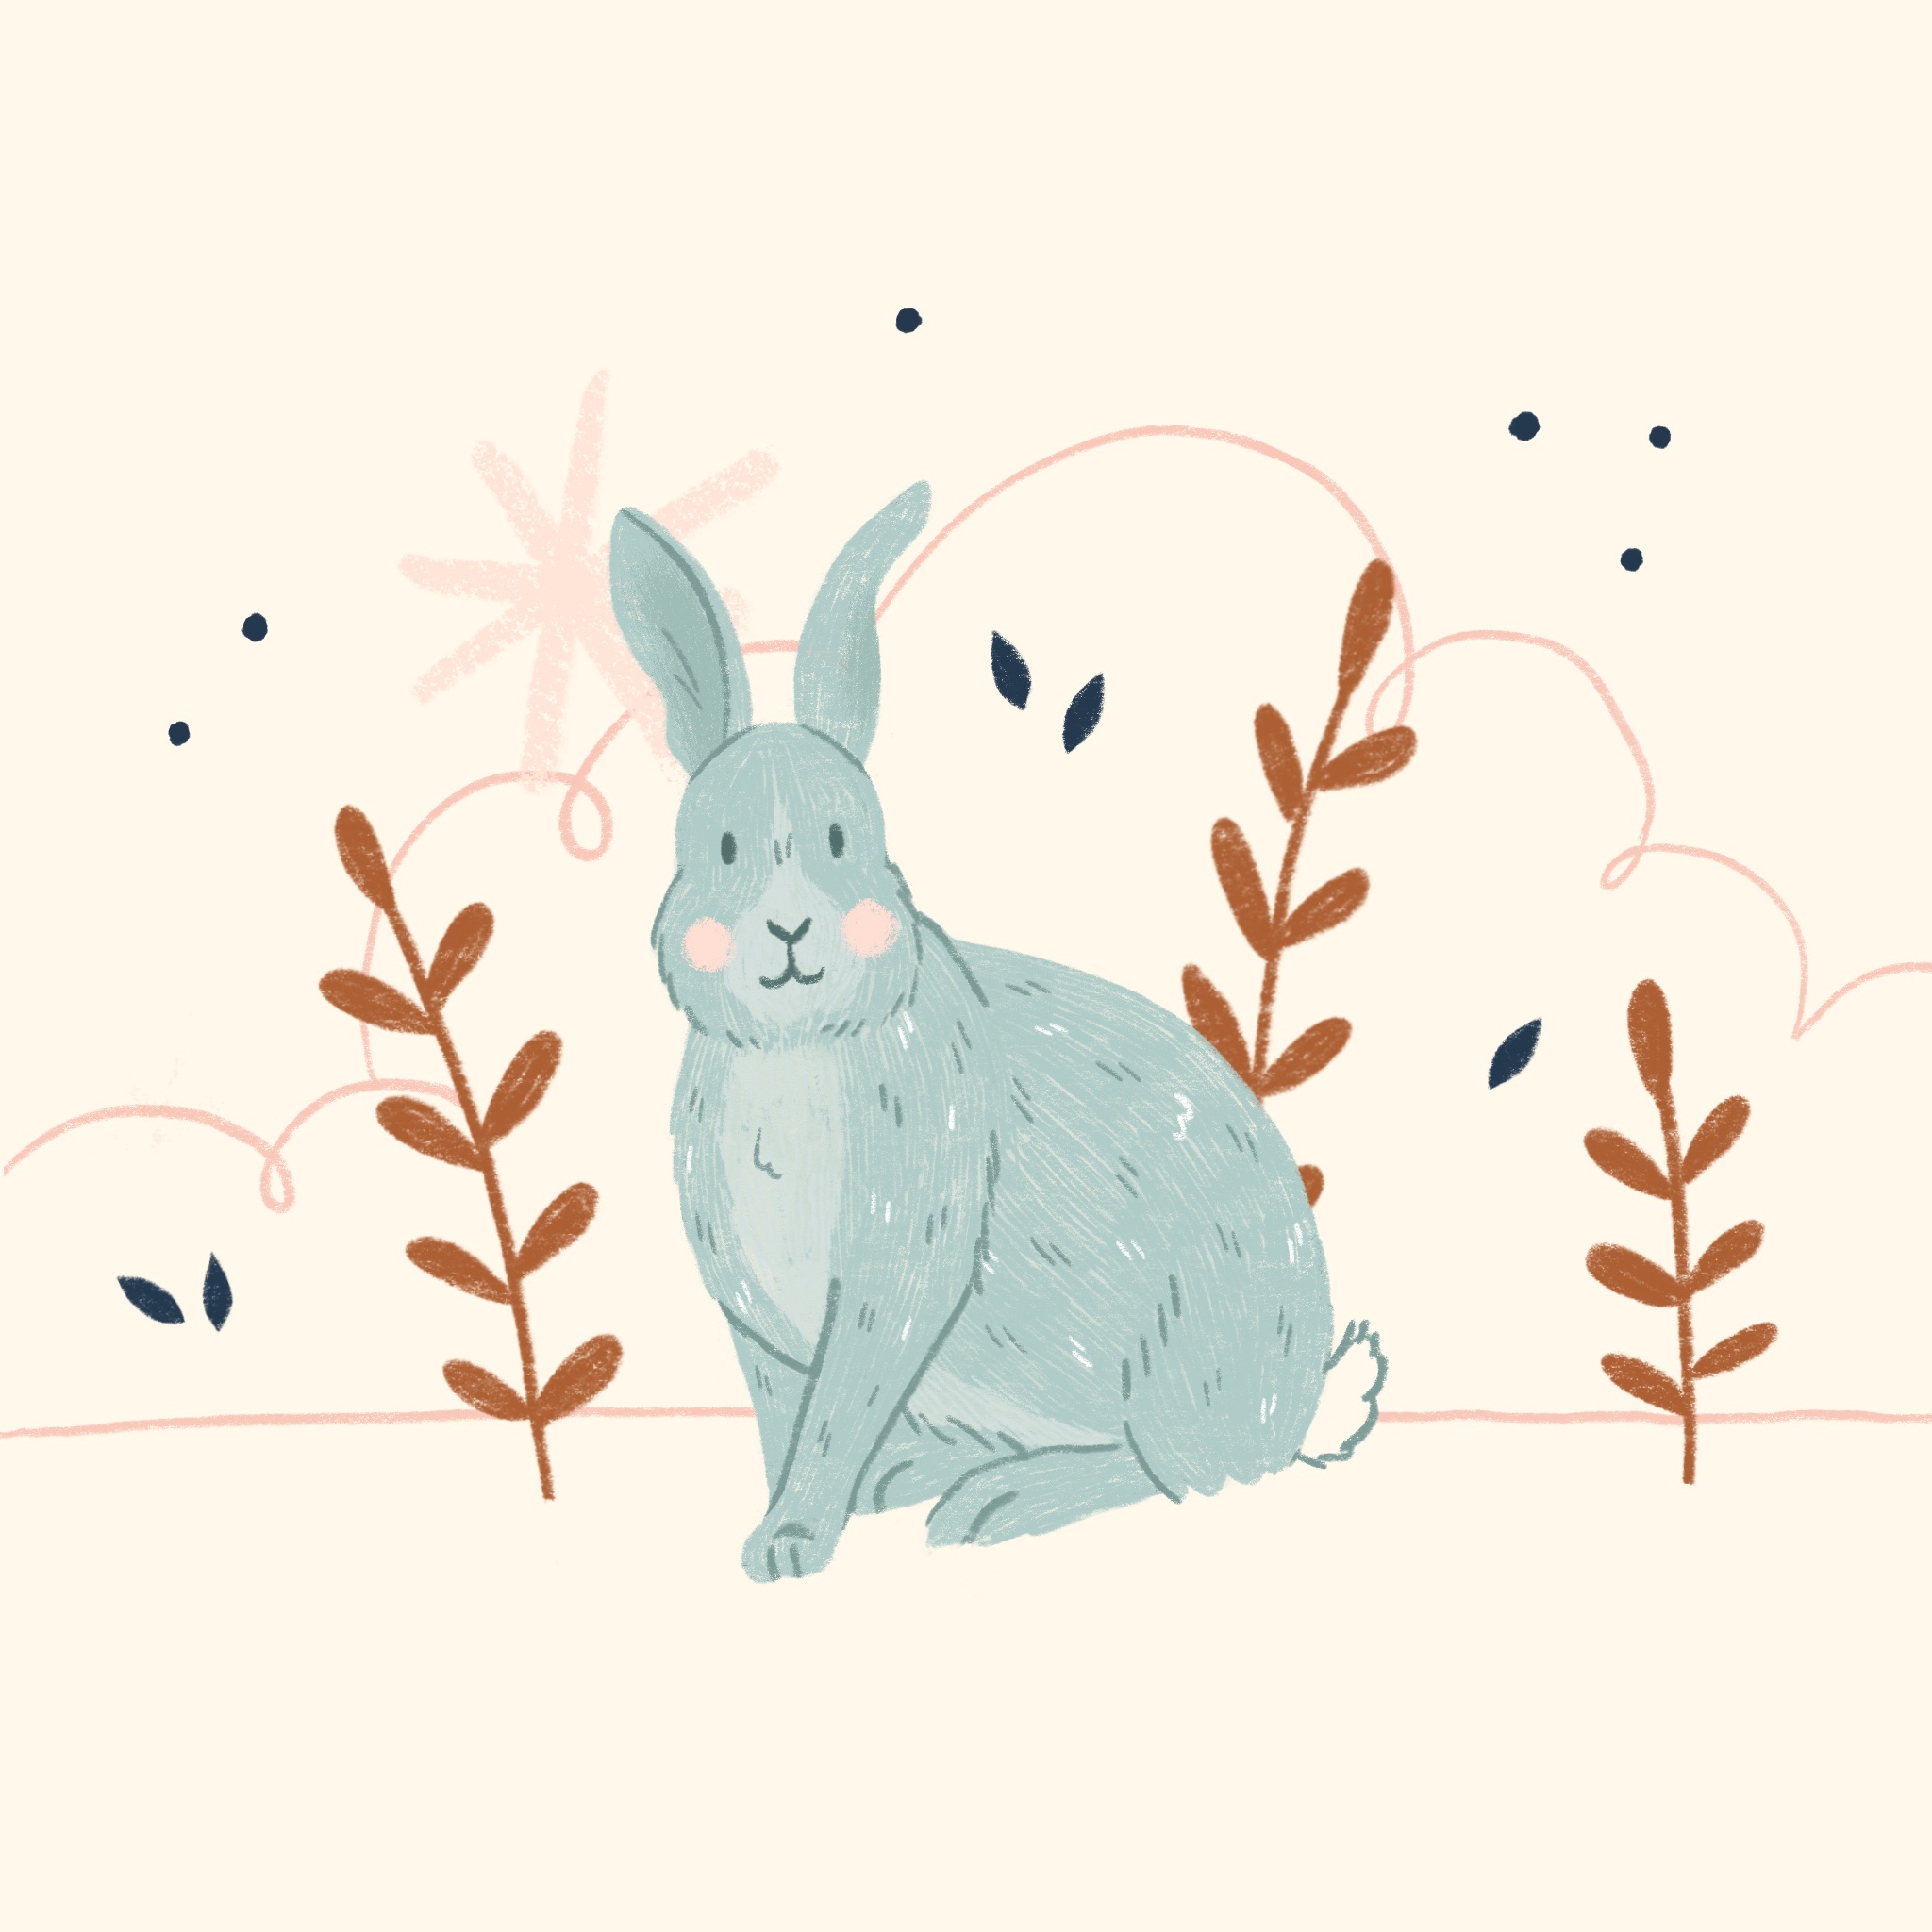 An illustration of a rabbit standing in front of some leaves and bushes